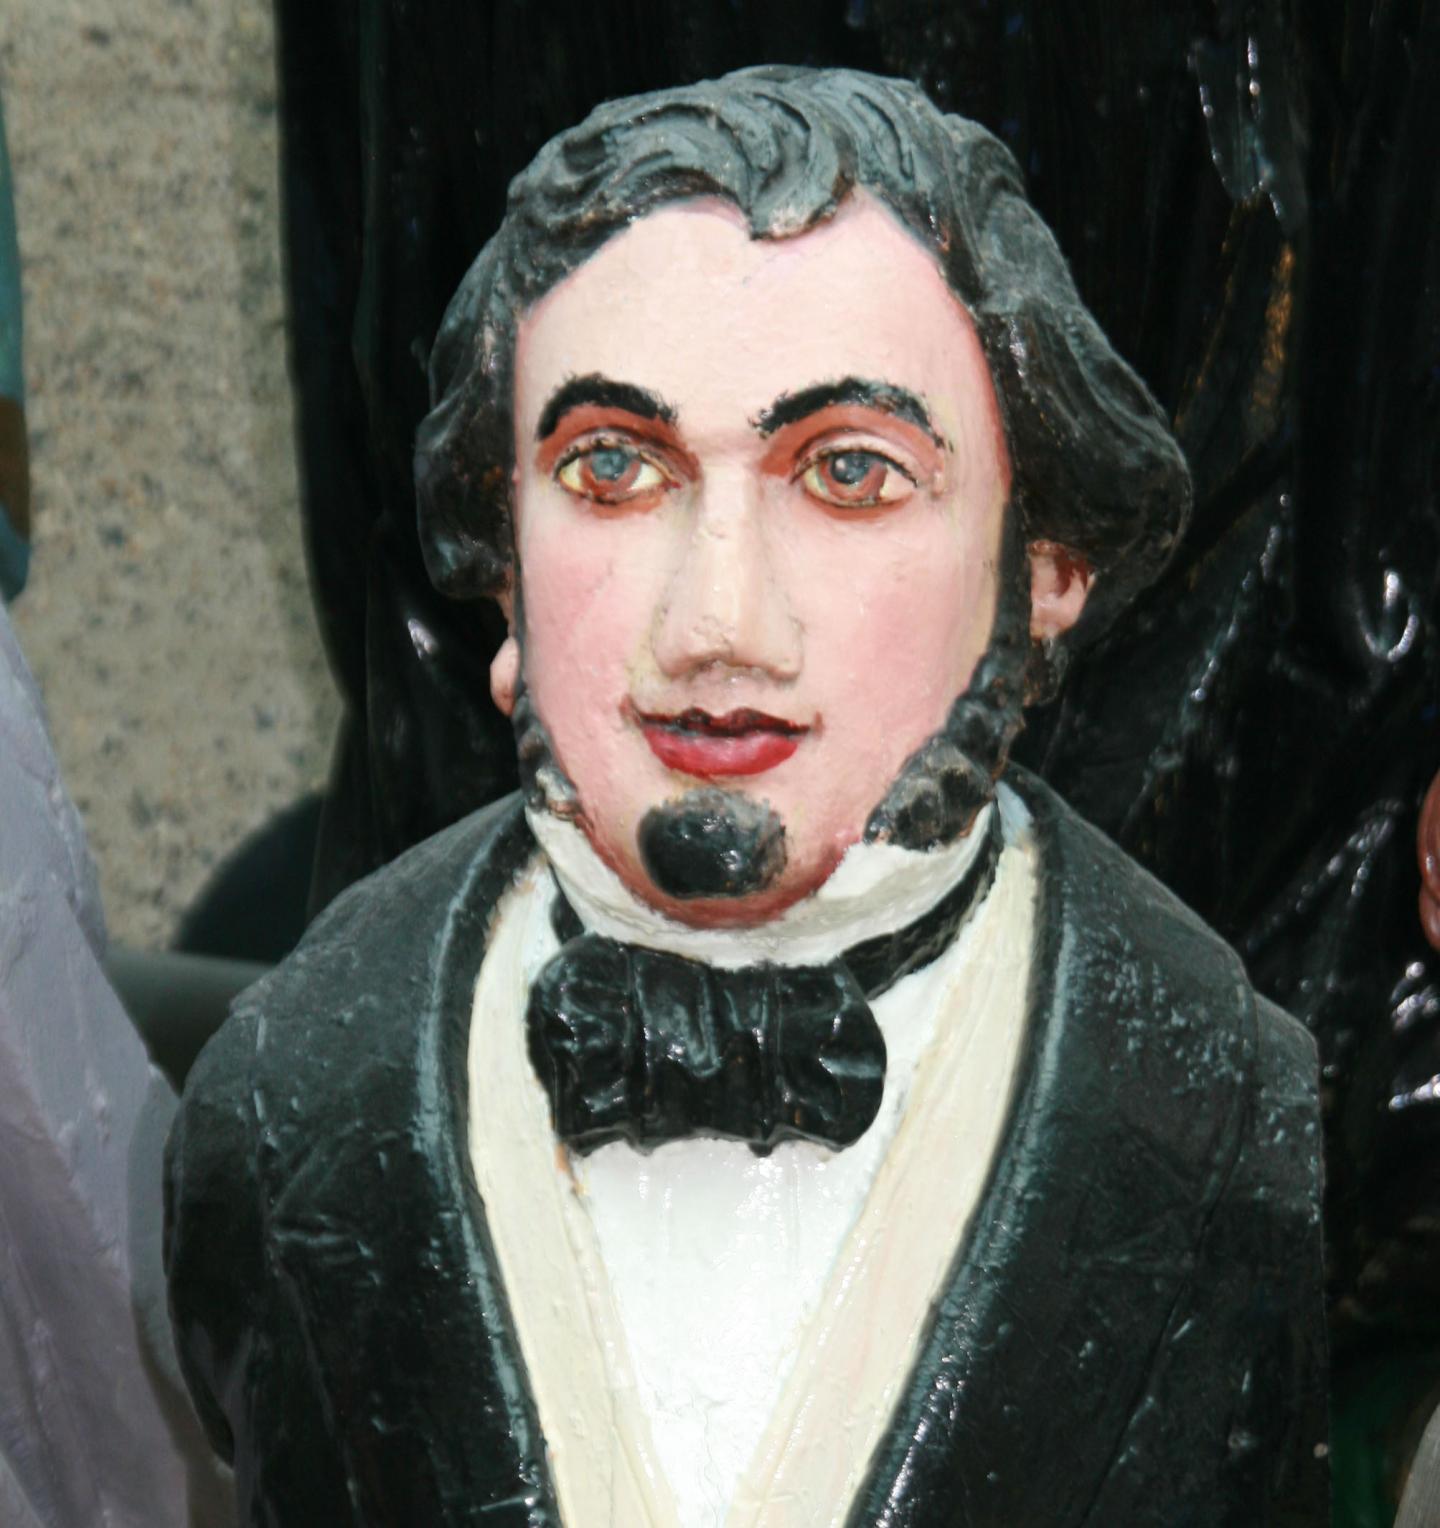 Disraeli, part of the figurehead collection at Cutty Sark